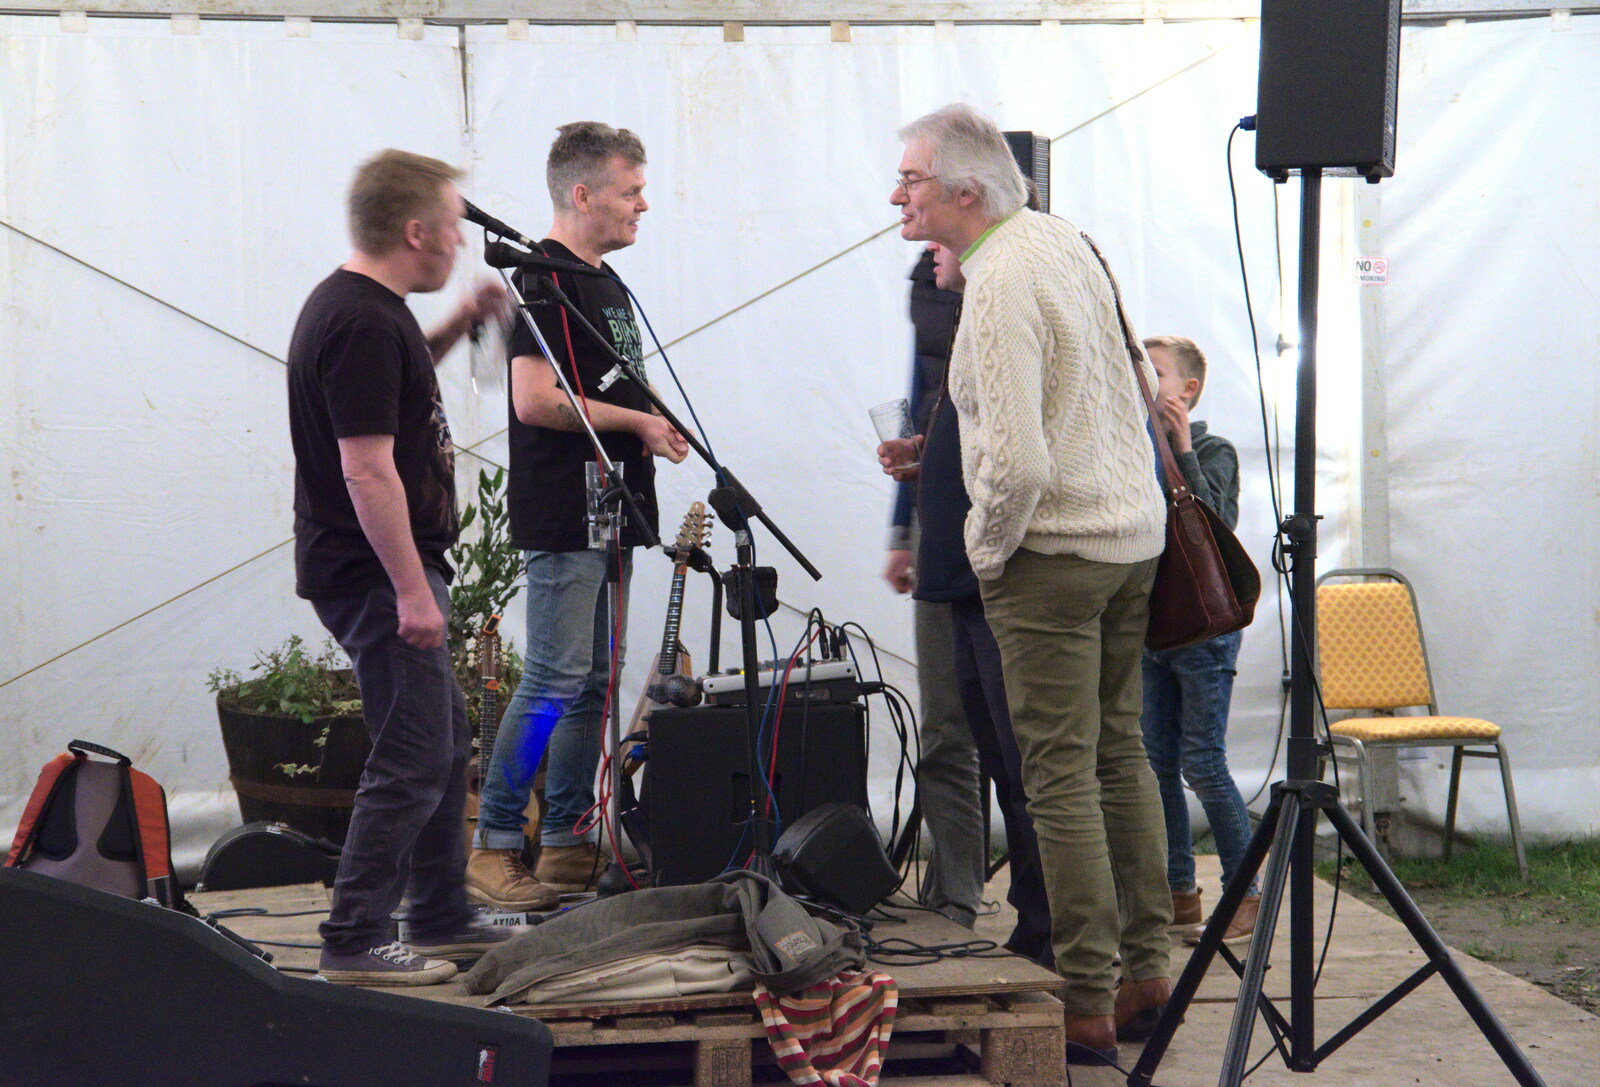 The Harvs finish their set from The Star Wing Winter Beer Fest, Redgrave, Suffolk - 31st January 2020